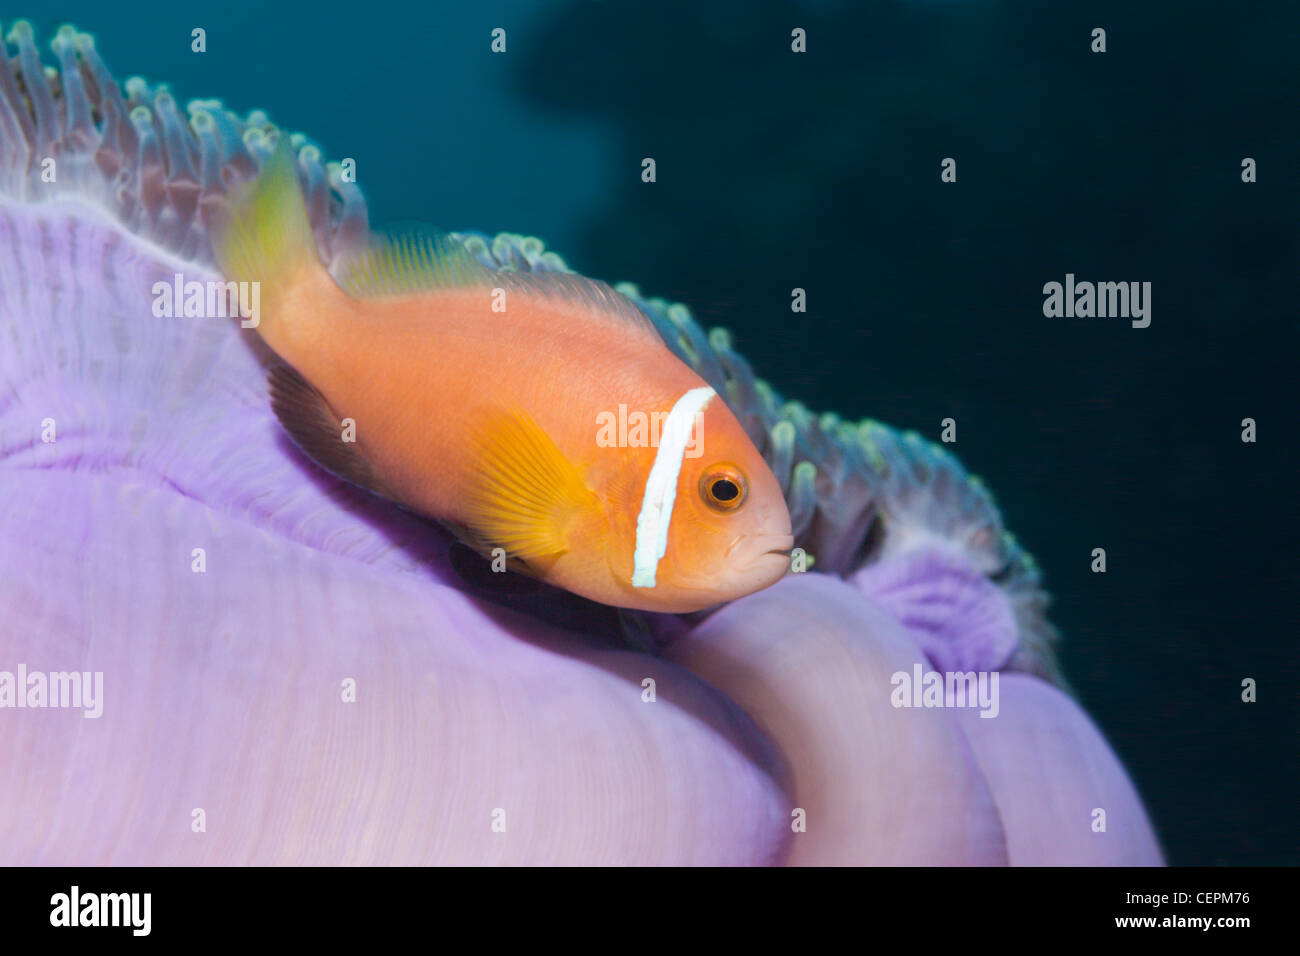 Maldives Anemonefish in Magnificent Sea Anemone, Amphiprion nigripes, Heteractis magnifica, Baa Atoll, Indian Ocean, Maldives Stock Photo